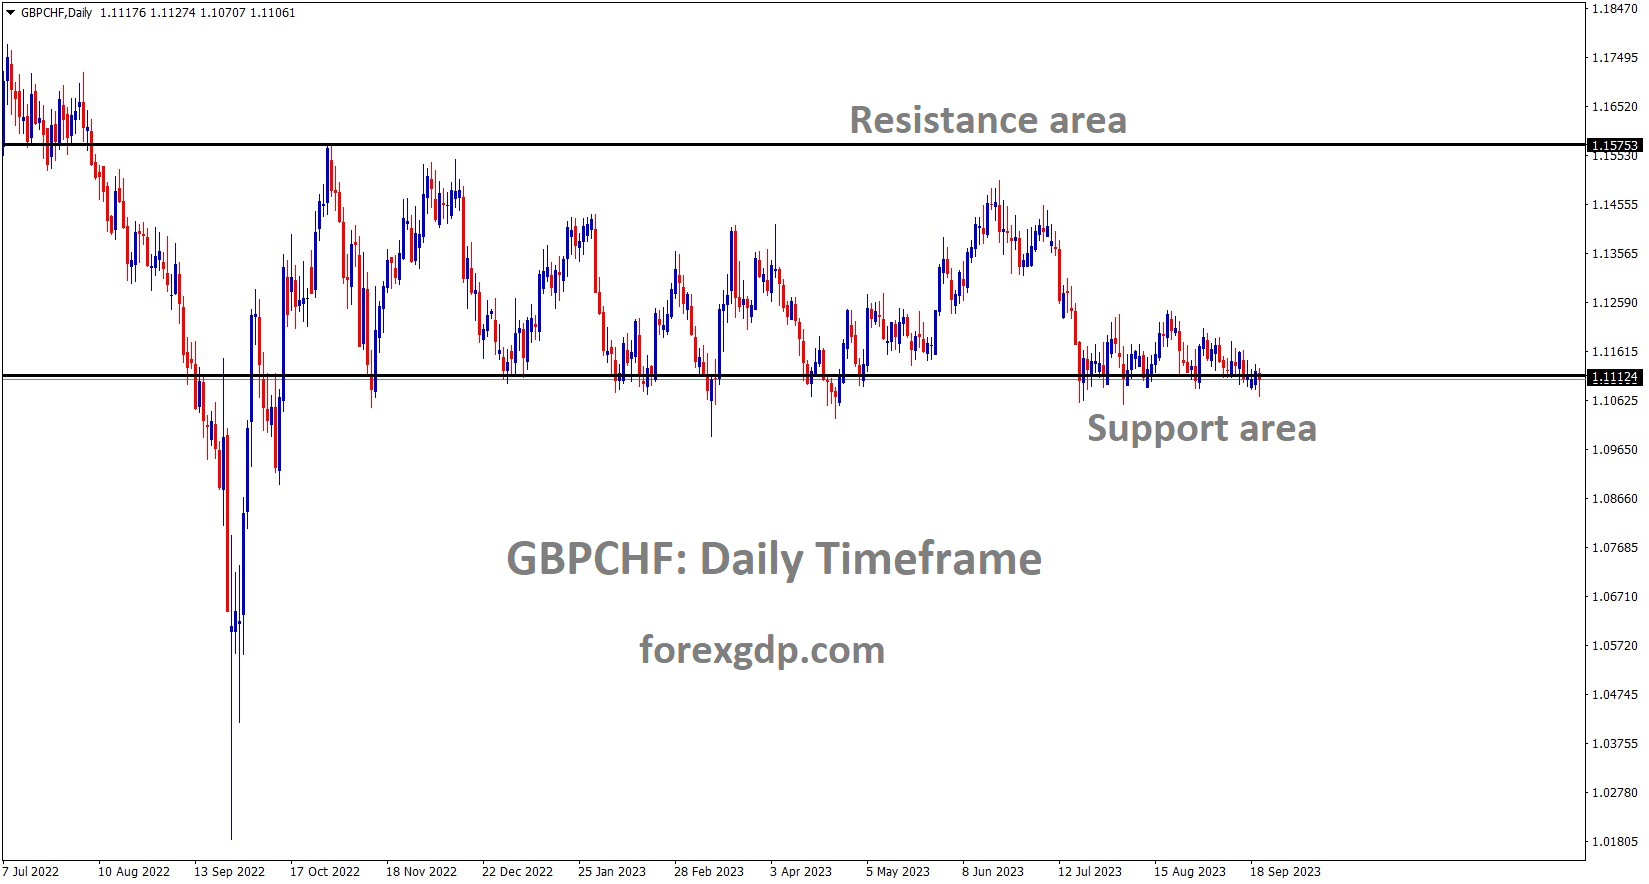 GBPCHF is moving in the Box pattern and the market has reached the horizontal support area of the pattern